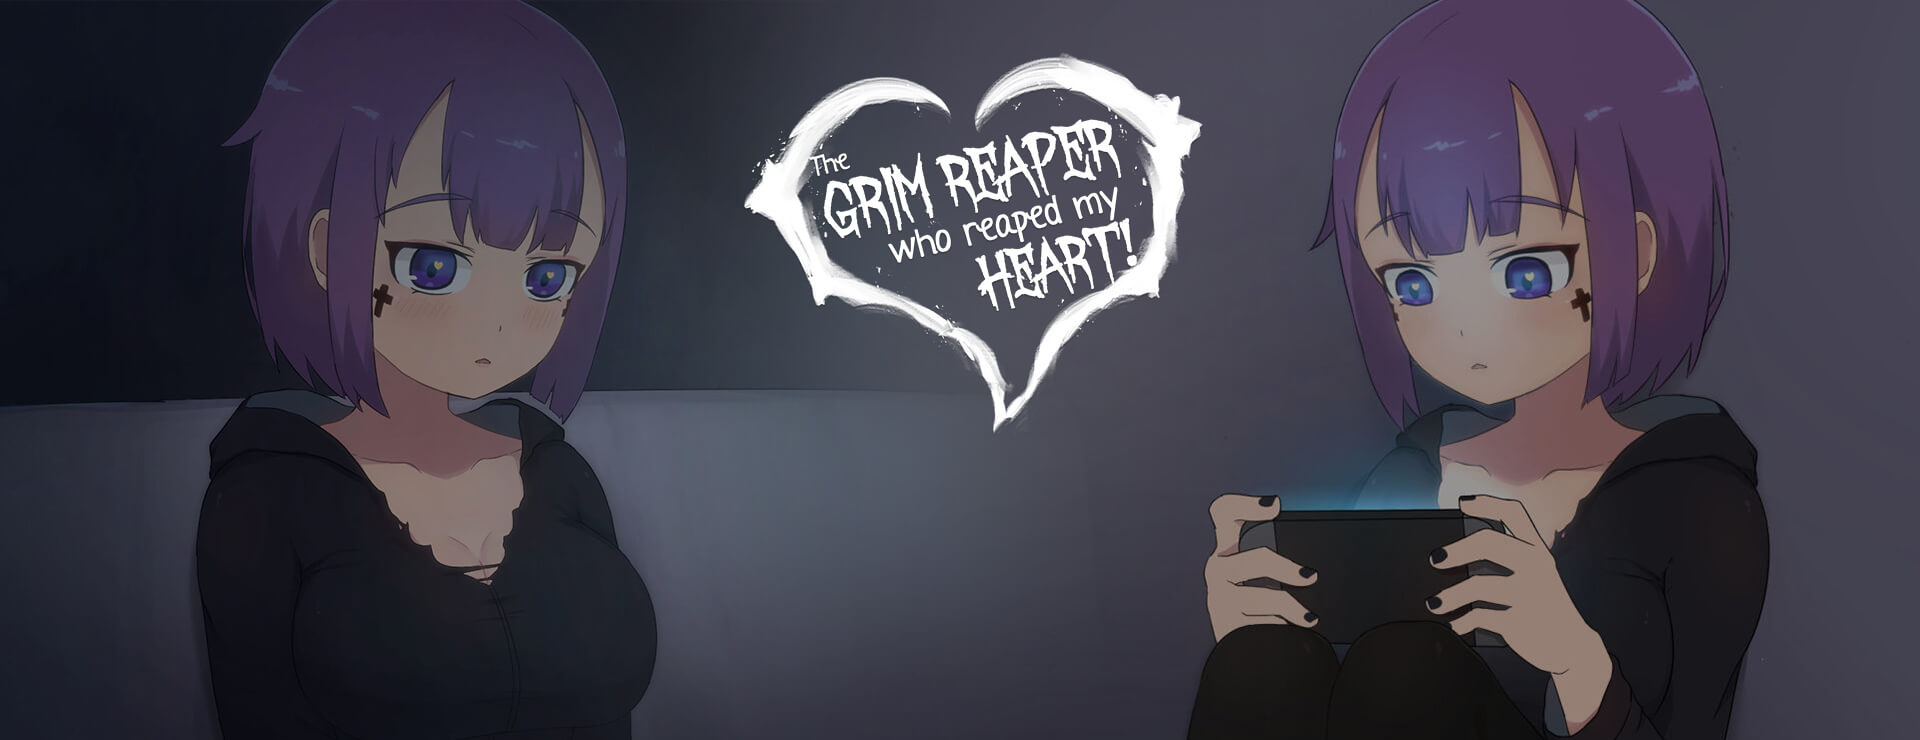 The Grim Reaper who Reaped my Heart! - 虚拟小说 遊戲